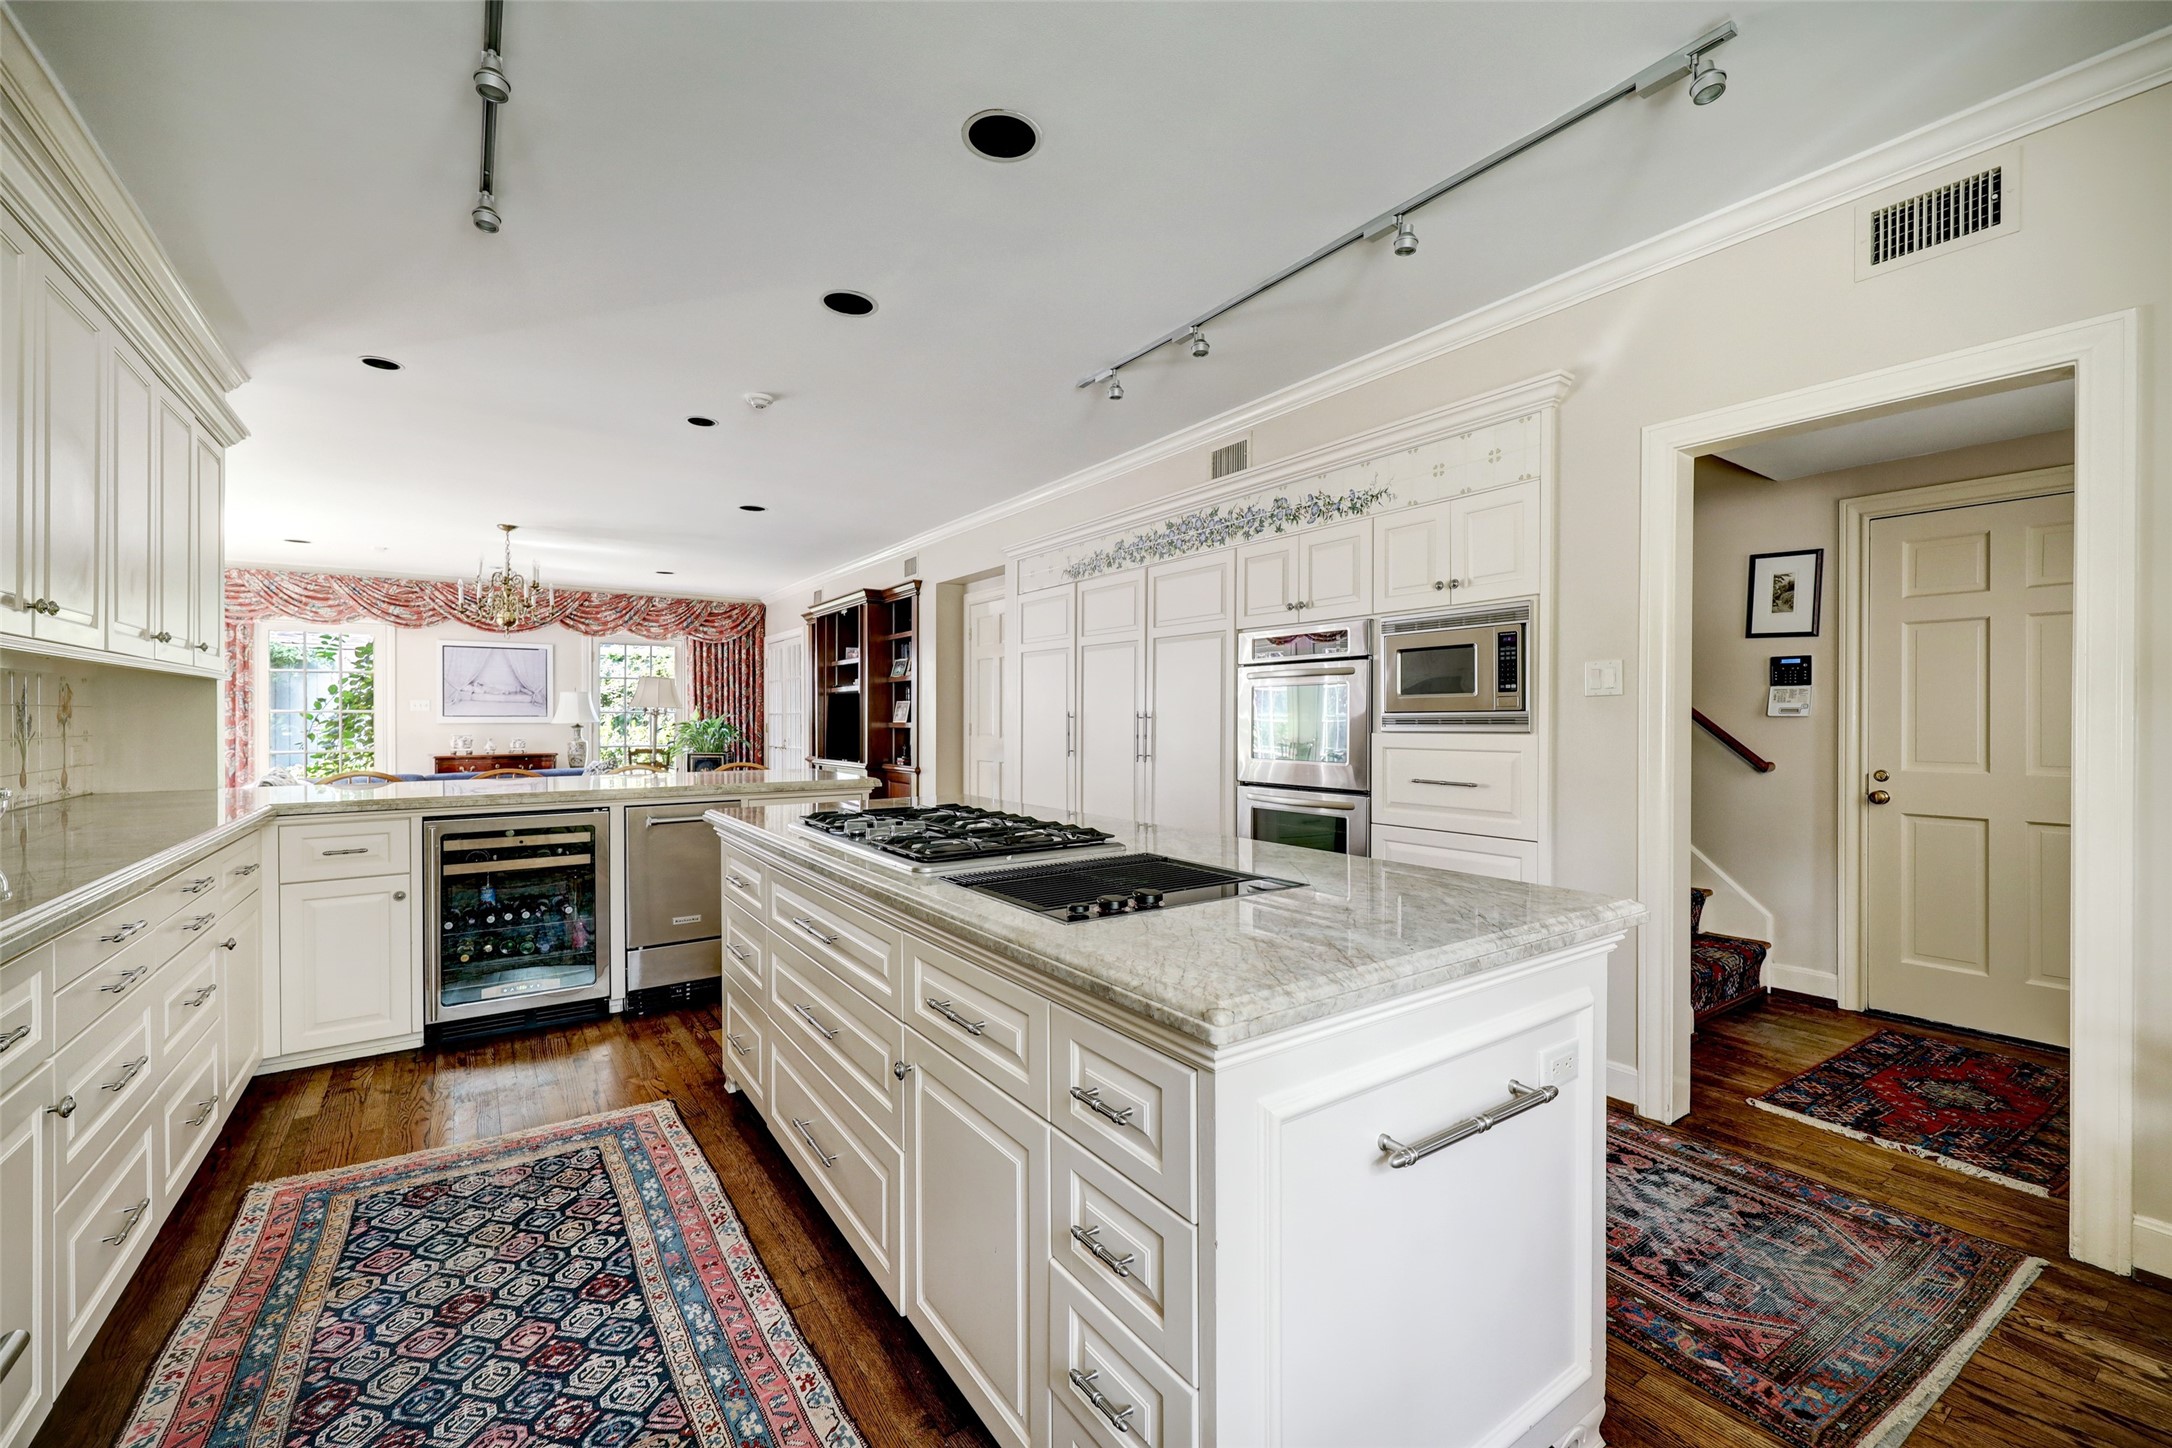 The kitchen is a culinary haven with ample storage options, a breakfast bar that gracefully separates the kitchen from the den and gleaming hardwood floors that flow seamlessly throughout the entire first floor.